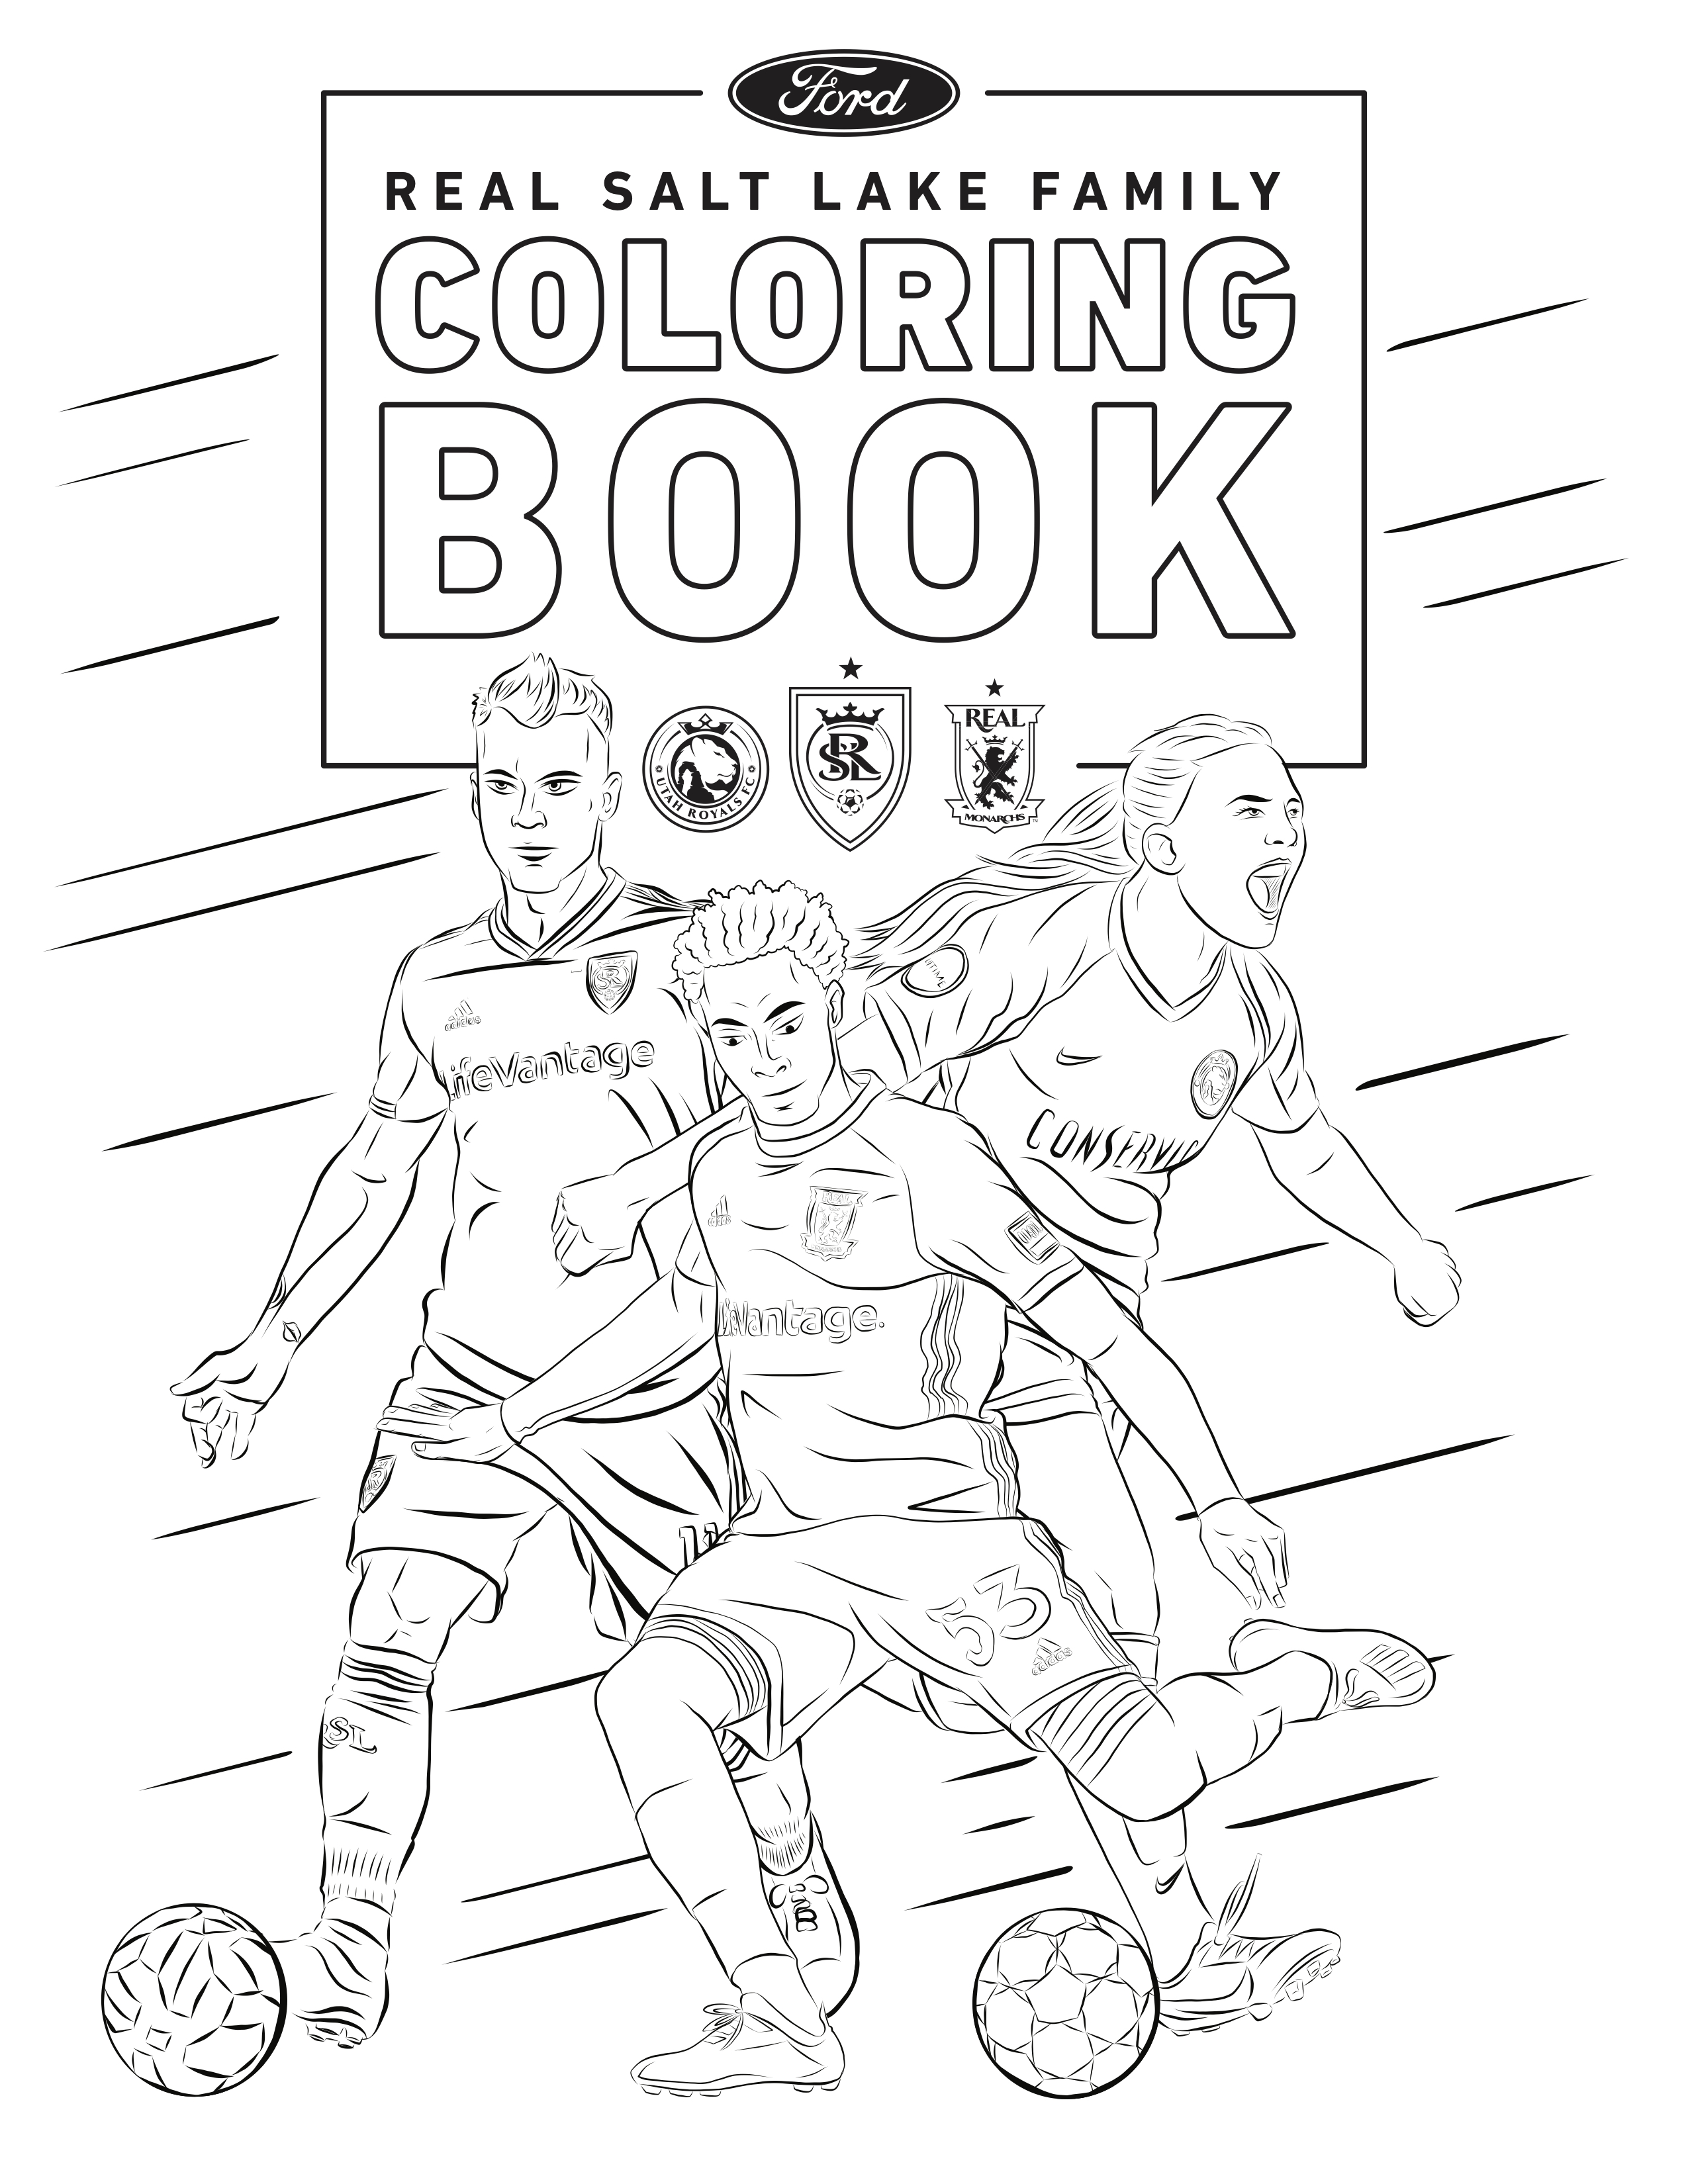 RSL Coloring Pages | Real Salt Lake